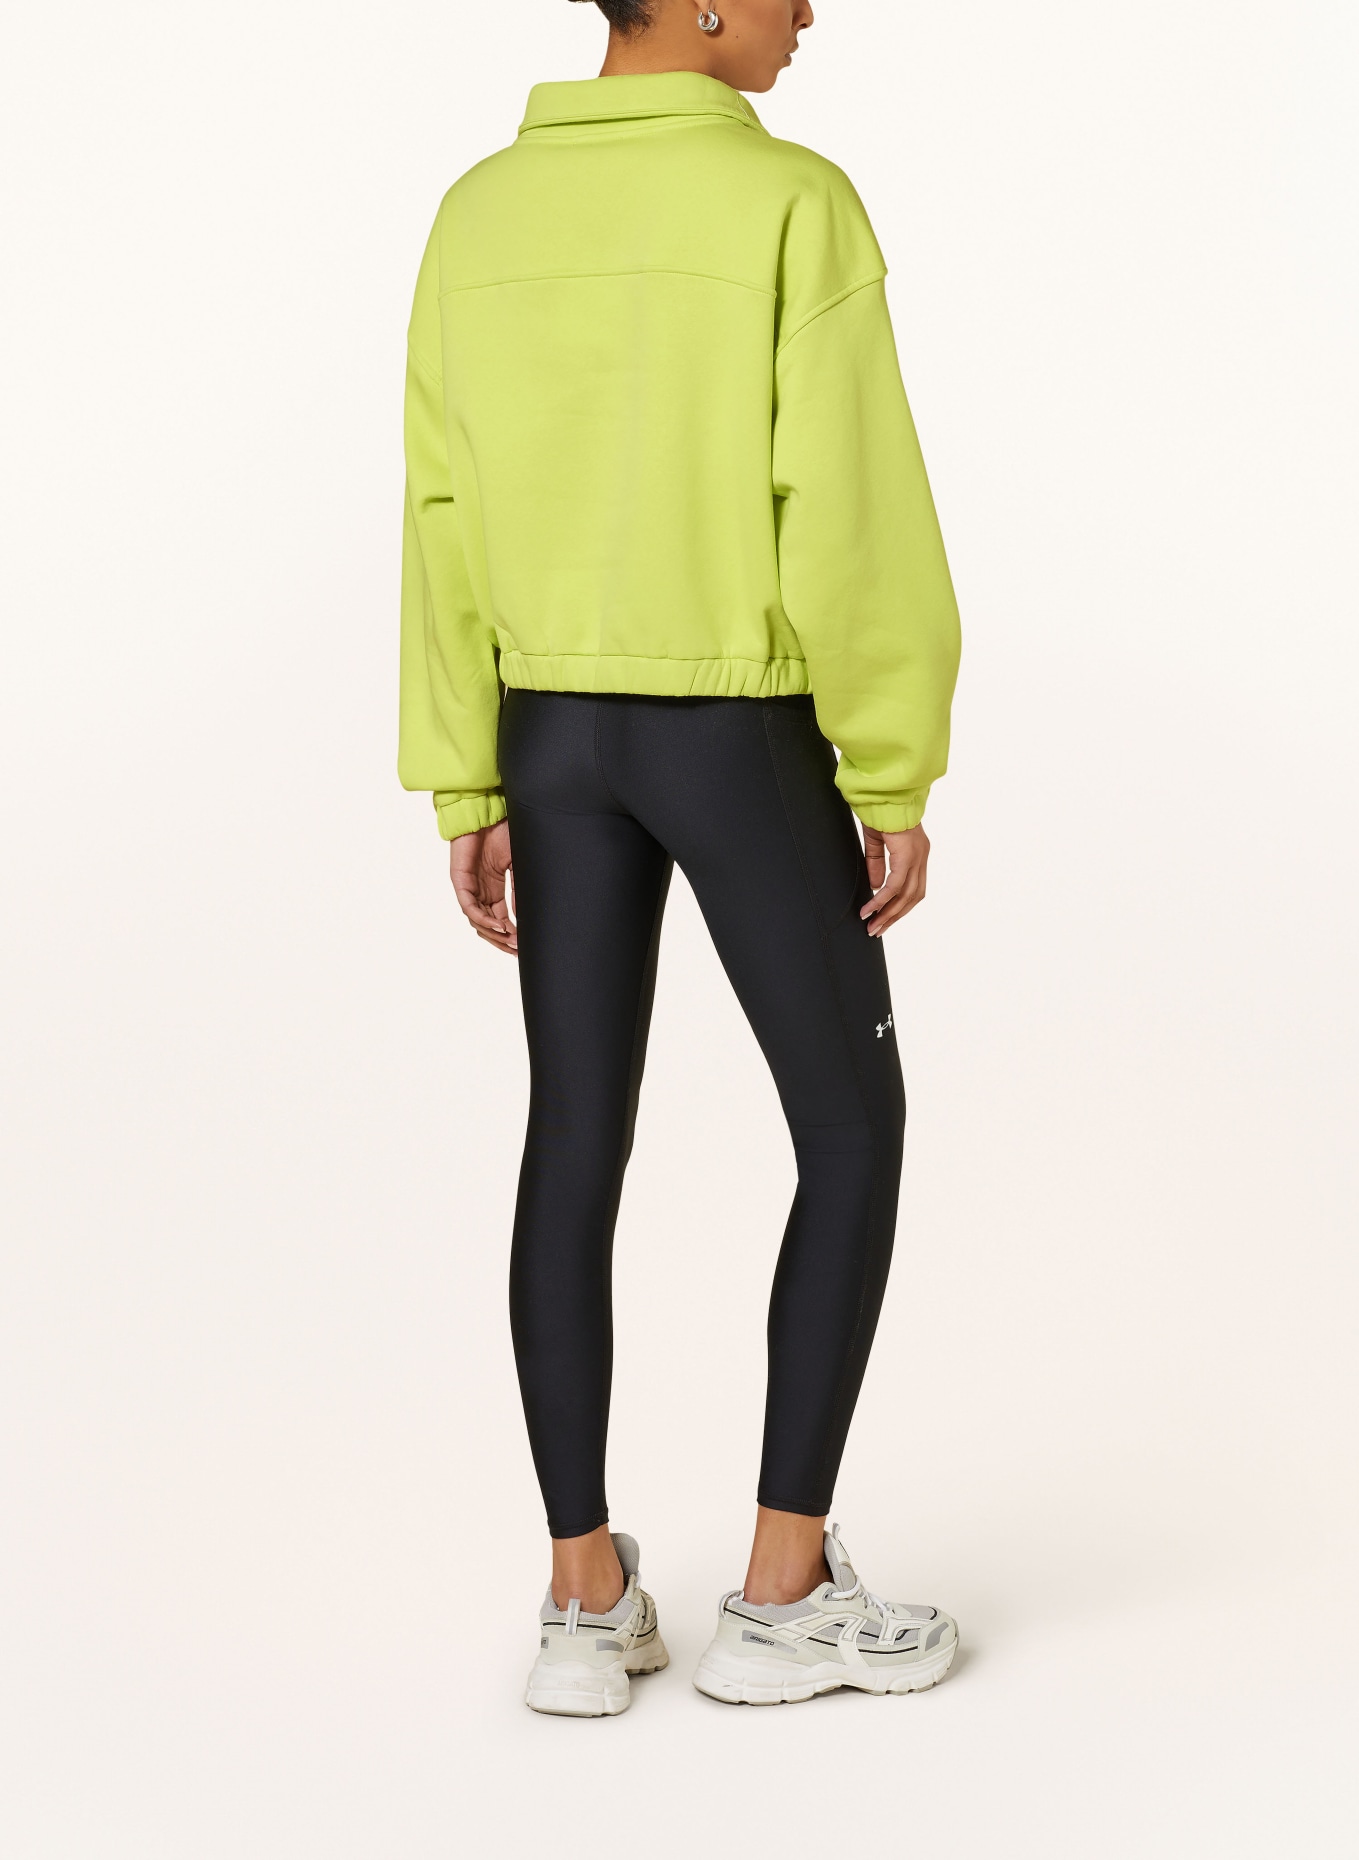 OH APRIL Sweat-Troyer EVIE, Farbe: LIME LIME (Bild 3)